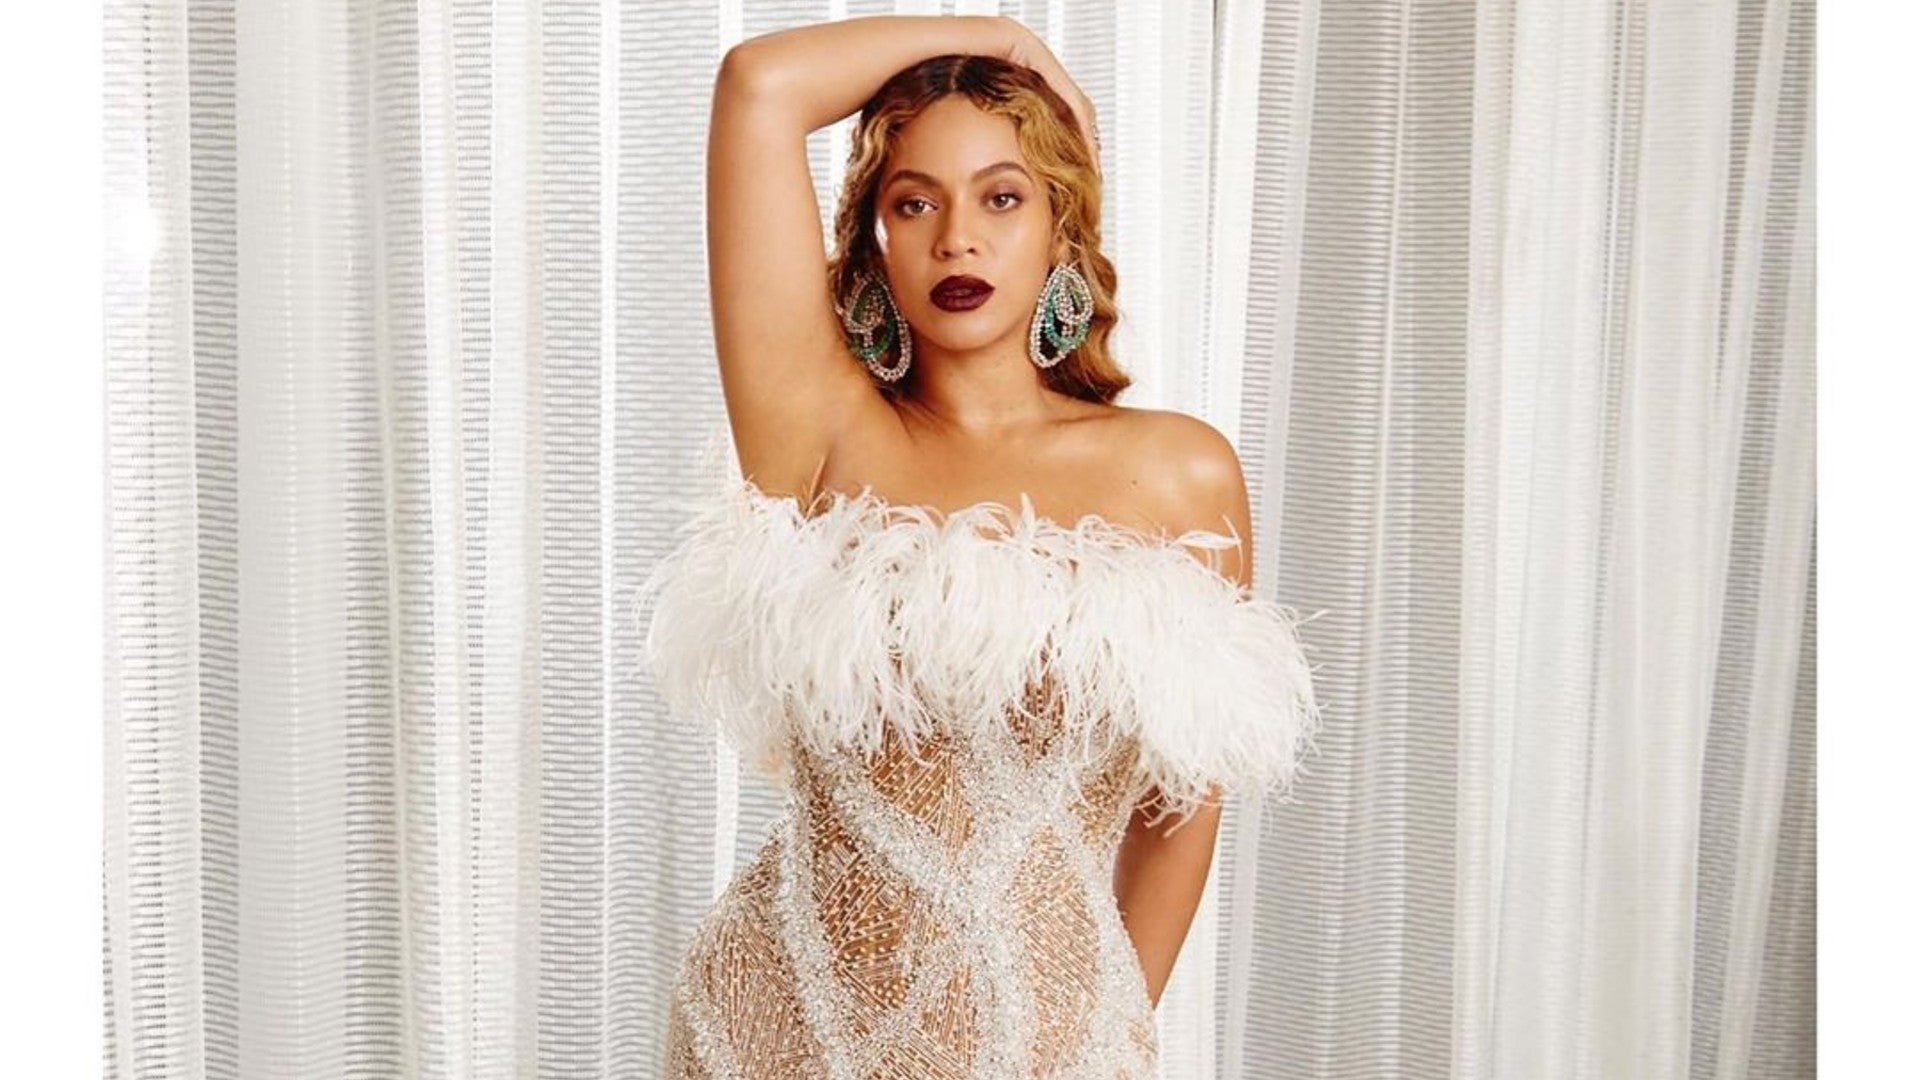 7 Times Beyoncé Was Speaking Directly To My Black Beauty In Her ‘Ask Me Anything’ Interview